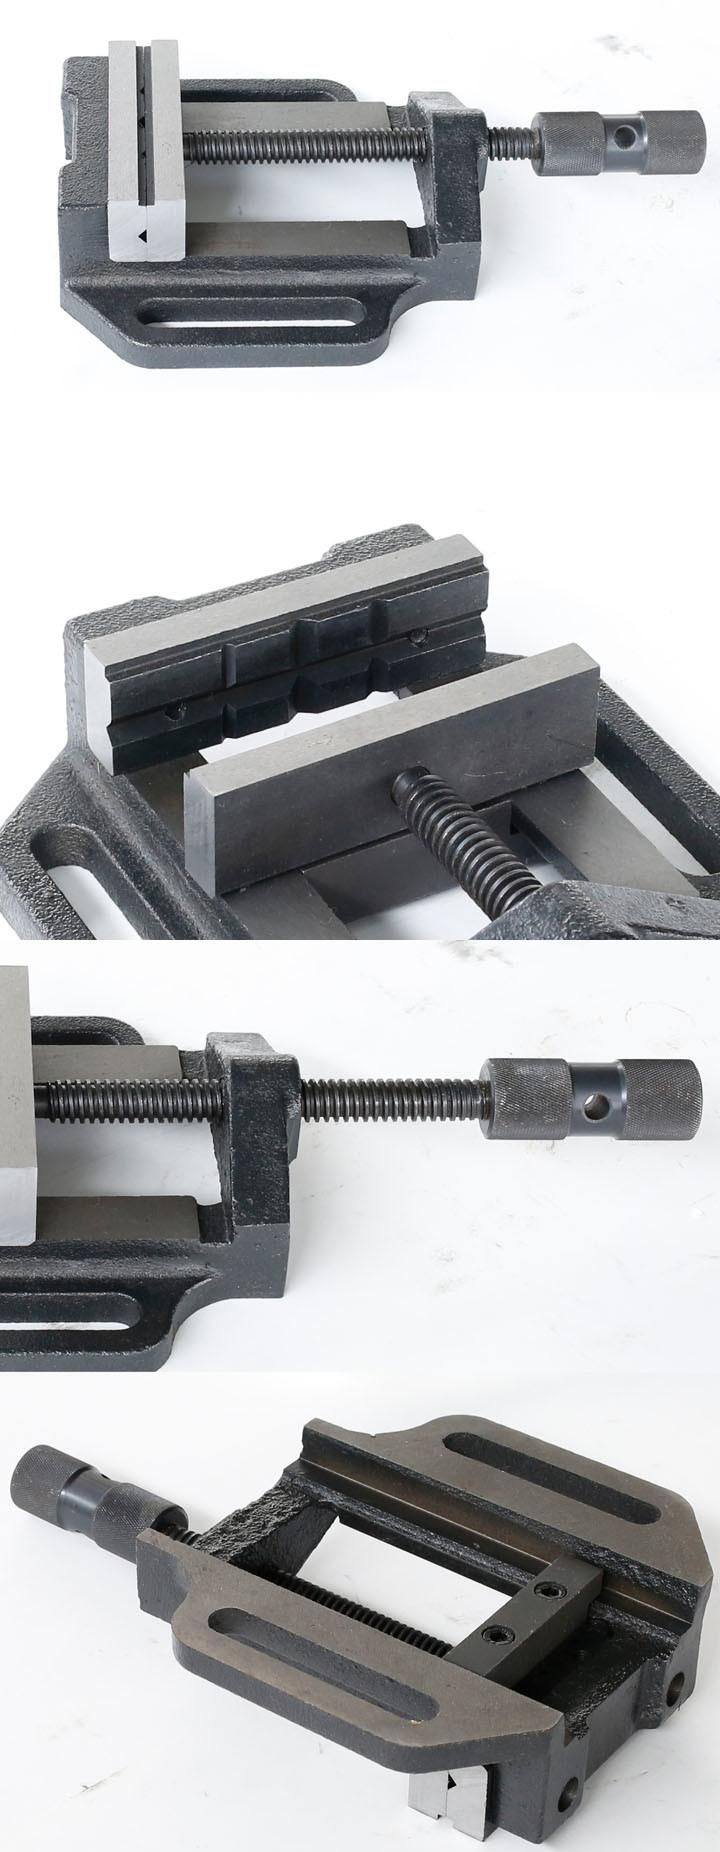 Easy Positioning Drill Press Vise